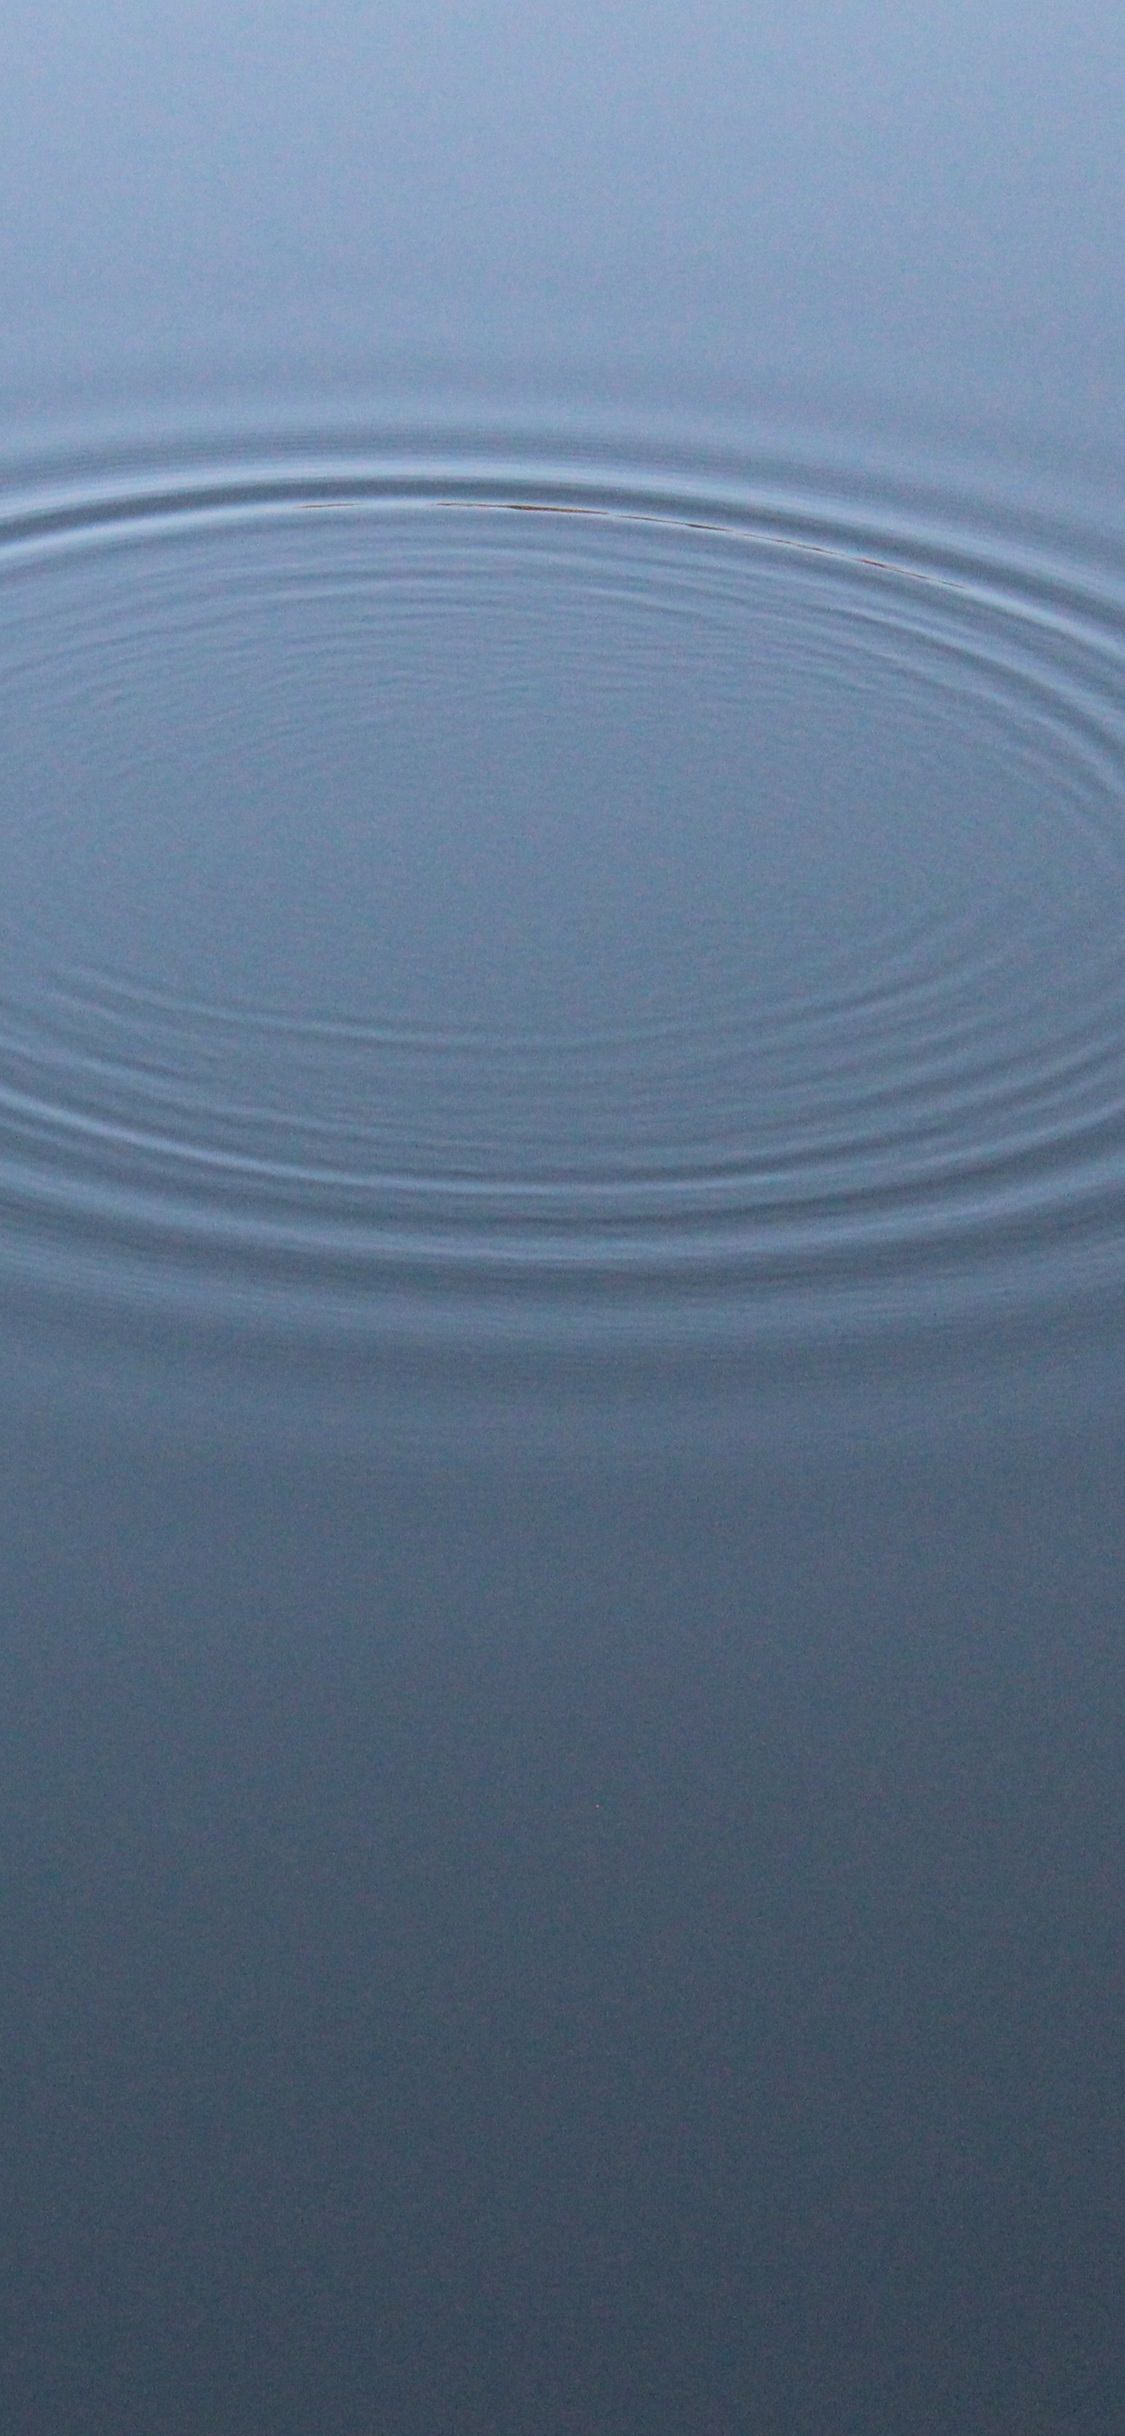 Ripple Ios 6 Wallpaper For iPhone X Blue, Download